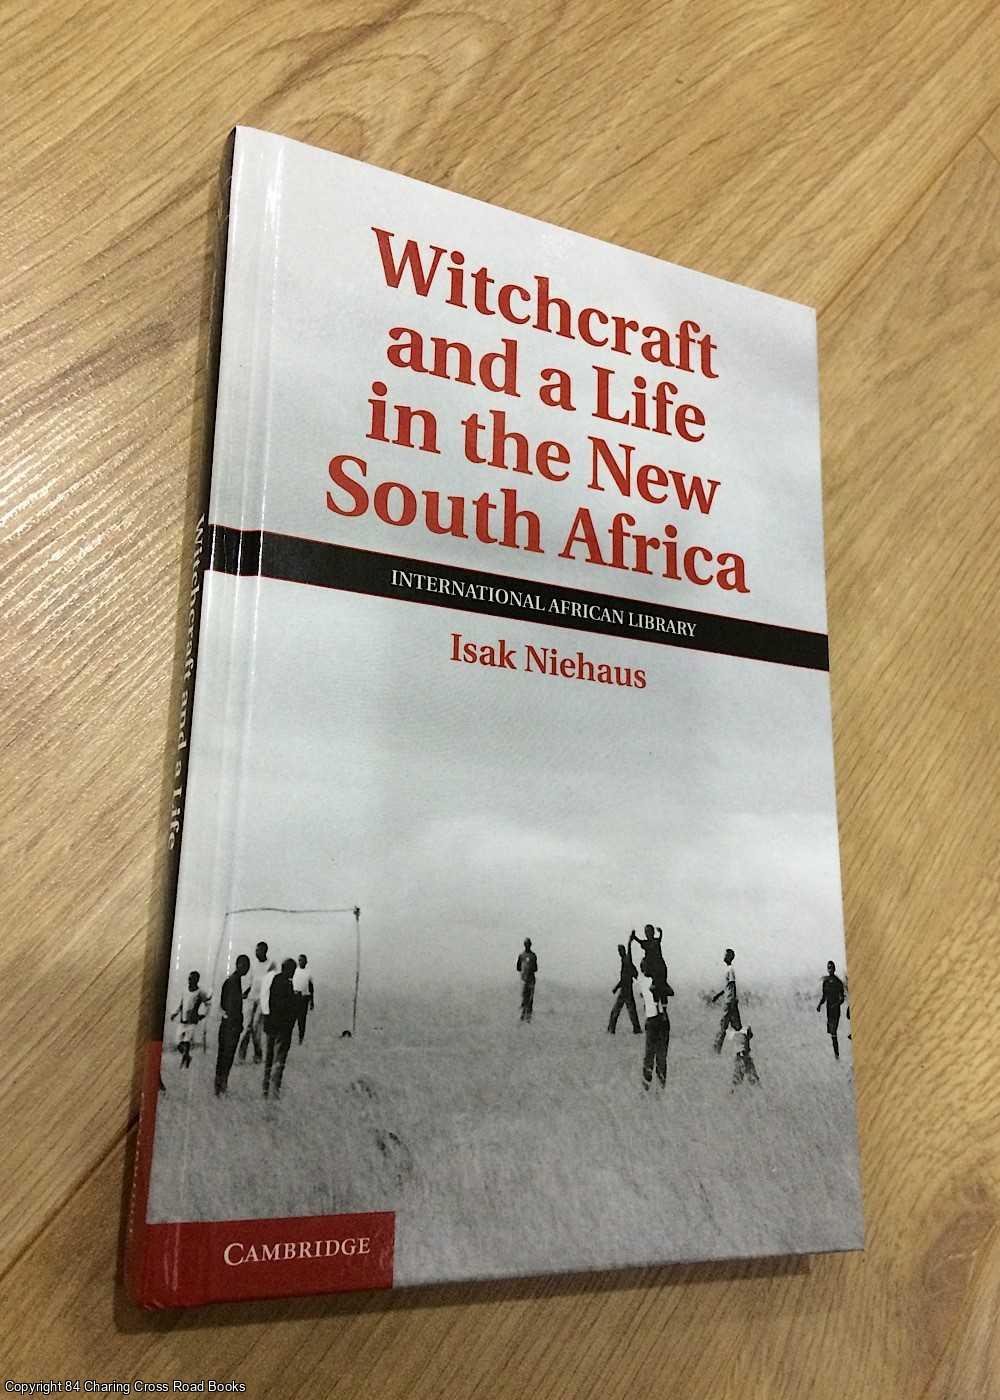 Niehaus, Isak - Witchcraft and a Life in the New South Africa